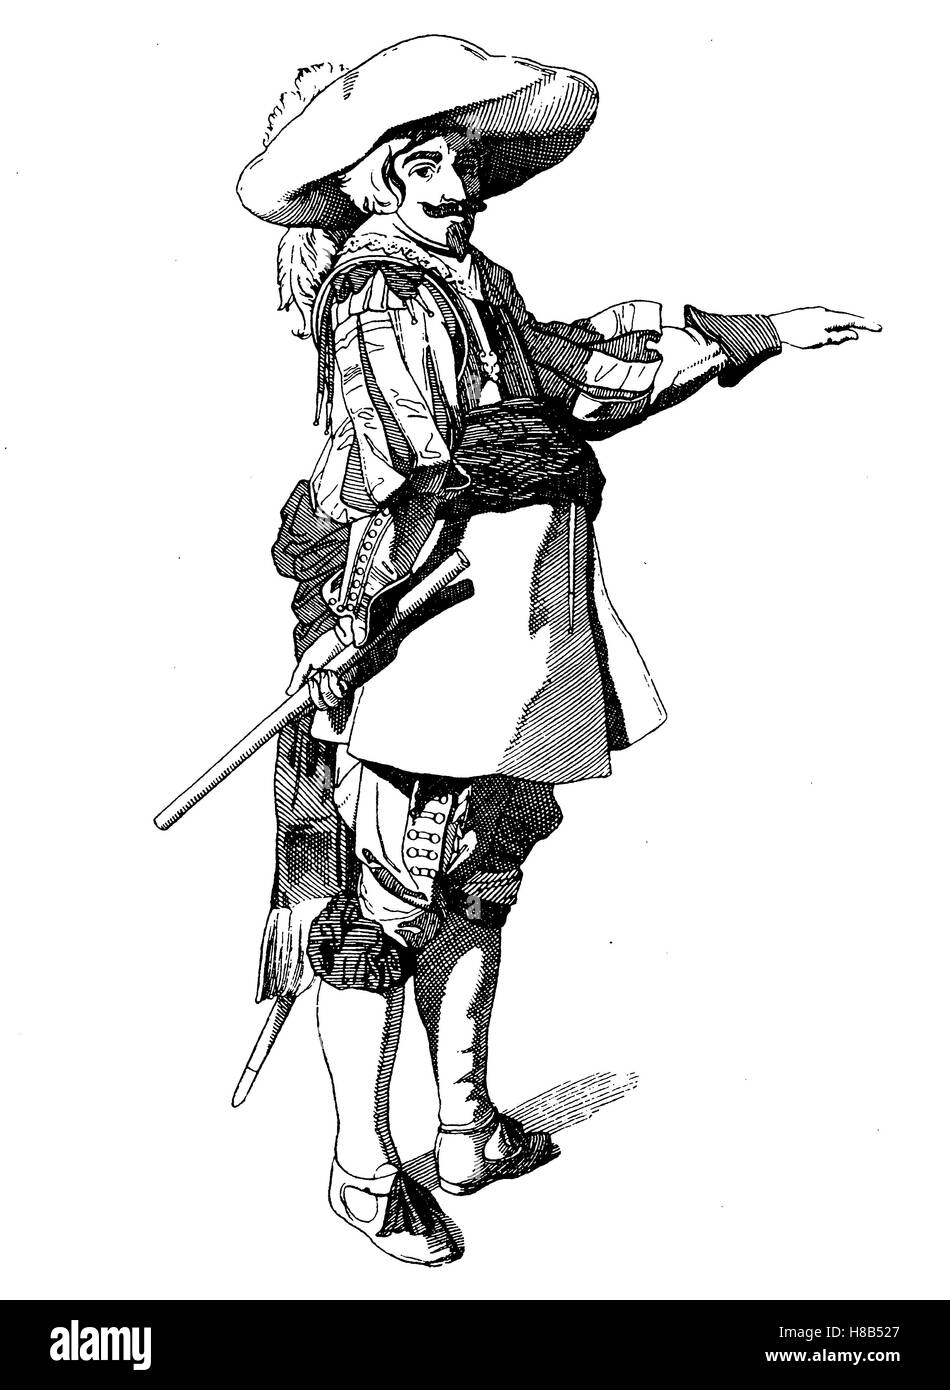 Captain from the Thirty Years' War, 1640, History of fashion, costume story Stock Photo